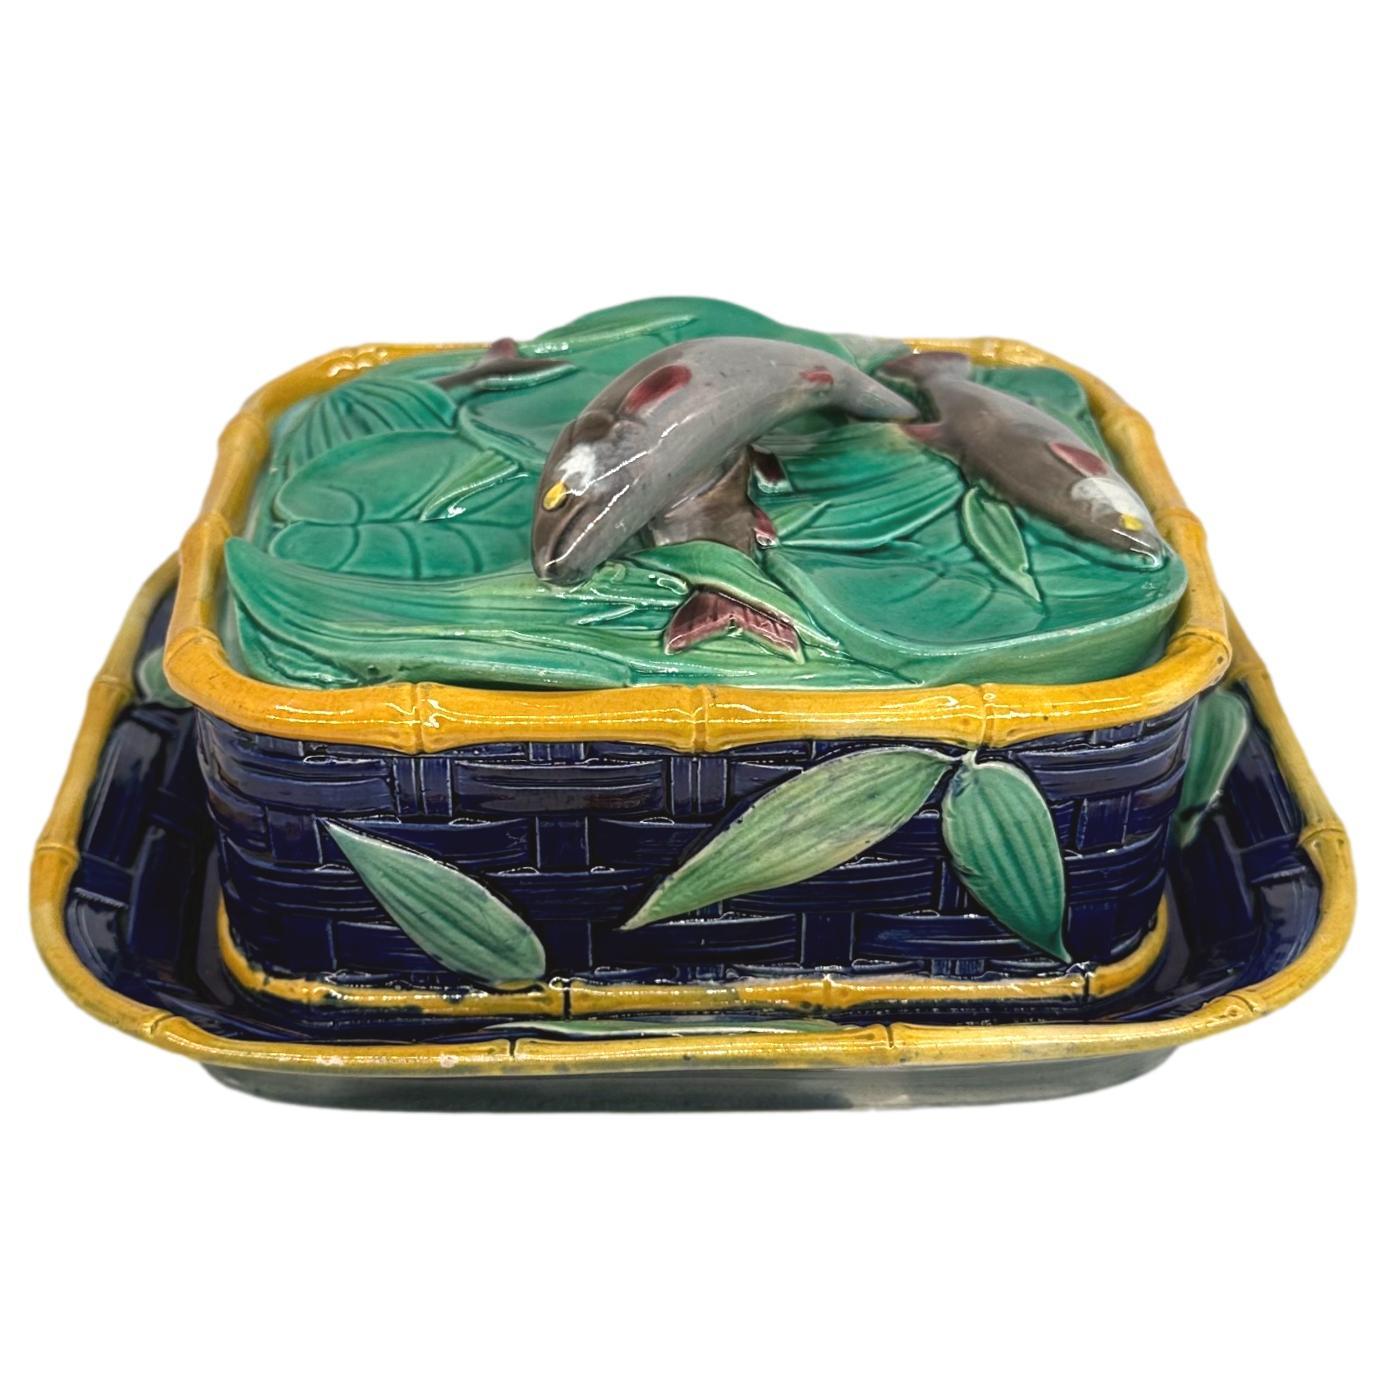 A Rare Victoria Pottery Company Majolica Sardine Box with five sardines on green glazed lotus pads and other foliage, trimmed in yellow bamboo with green shoots, the body and integral underplate are molded as a cobalt-glazed woven basket.  The